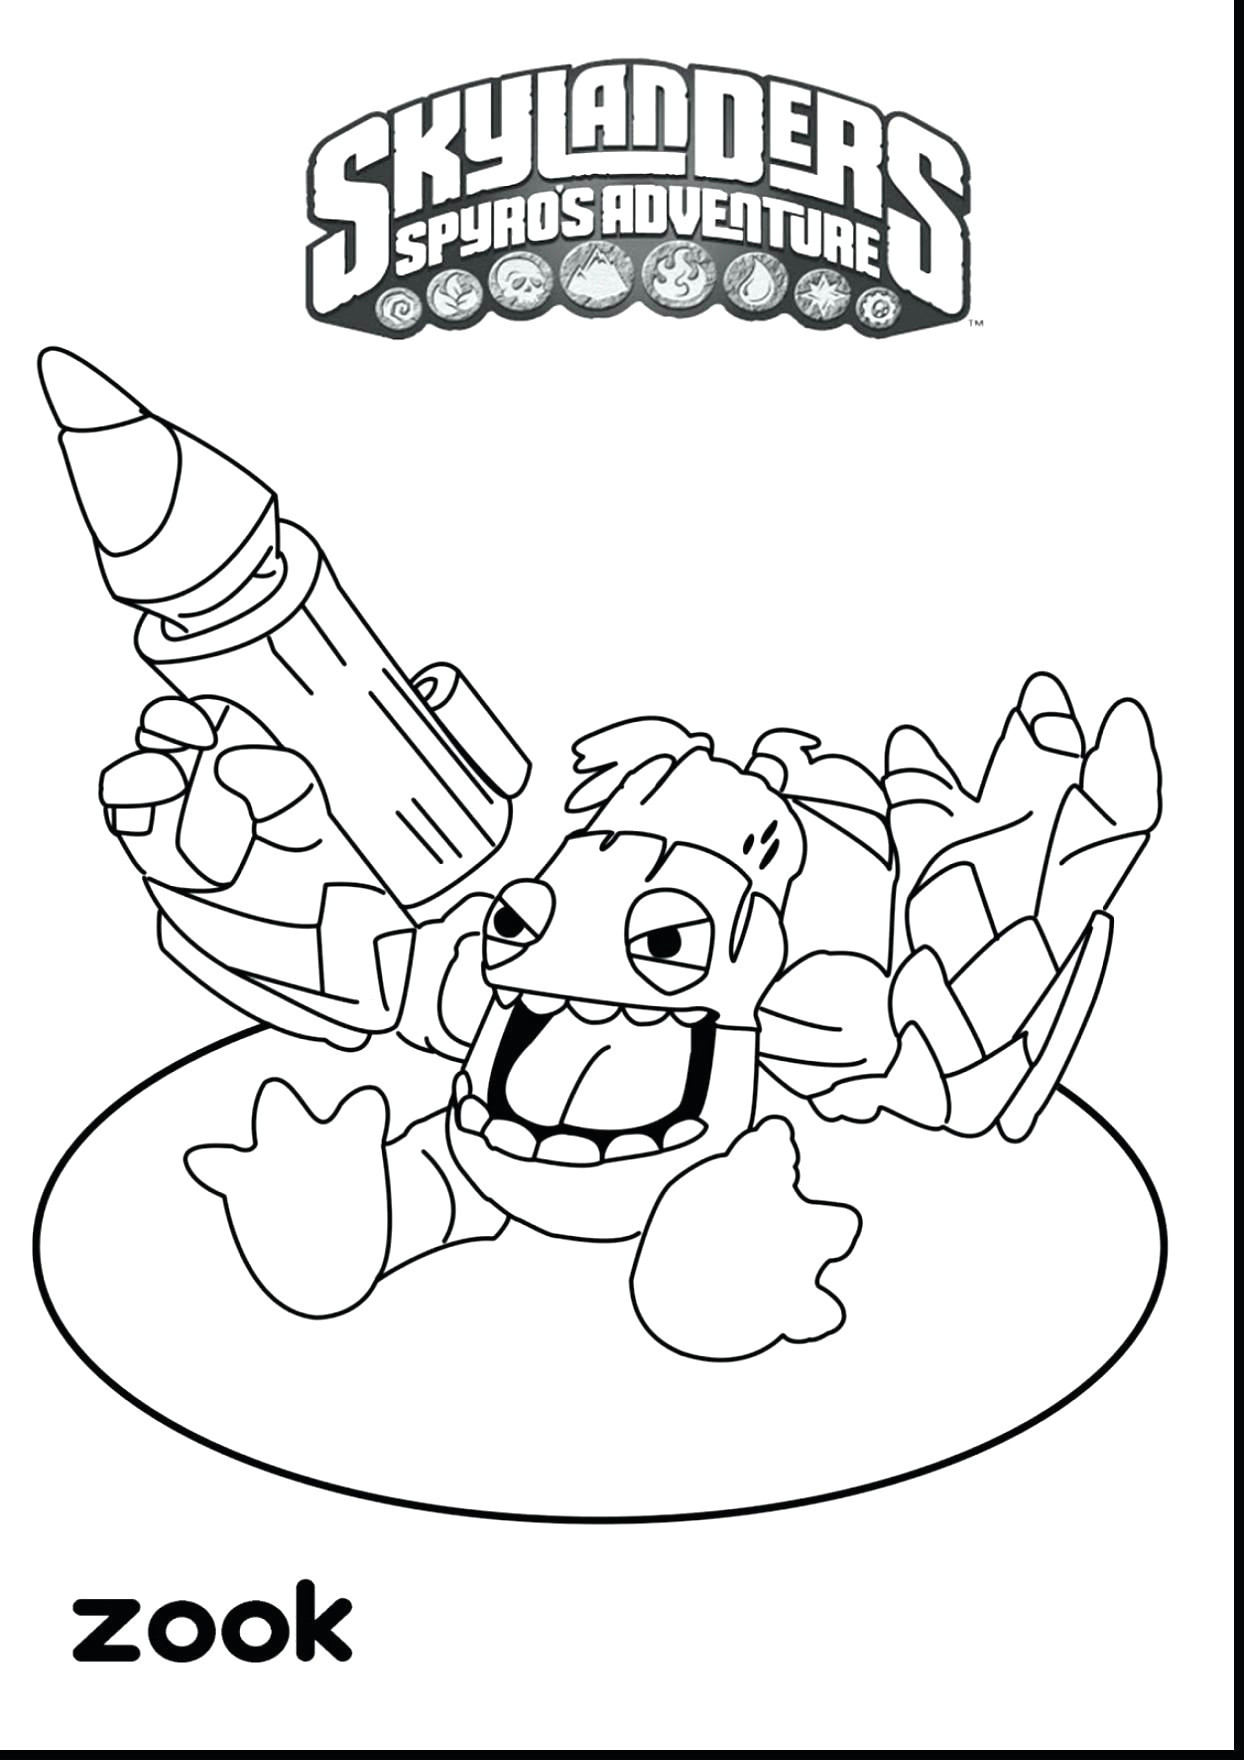 Easy Drawings Hands Www Colouring Pages Brilliant Easy to Draw Instruments Home Coloring